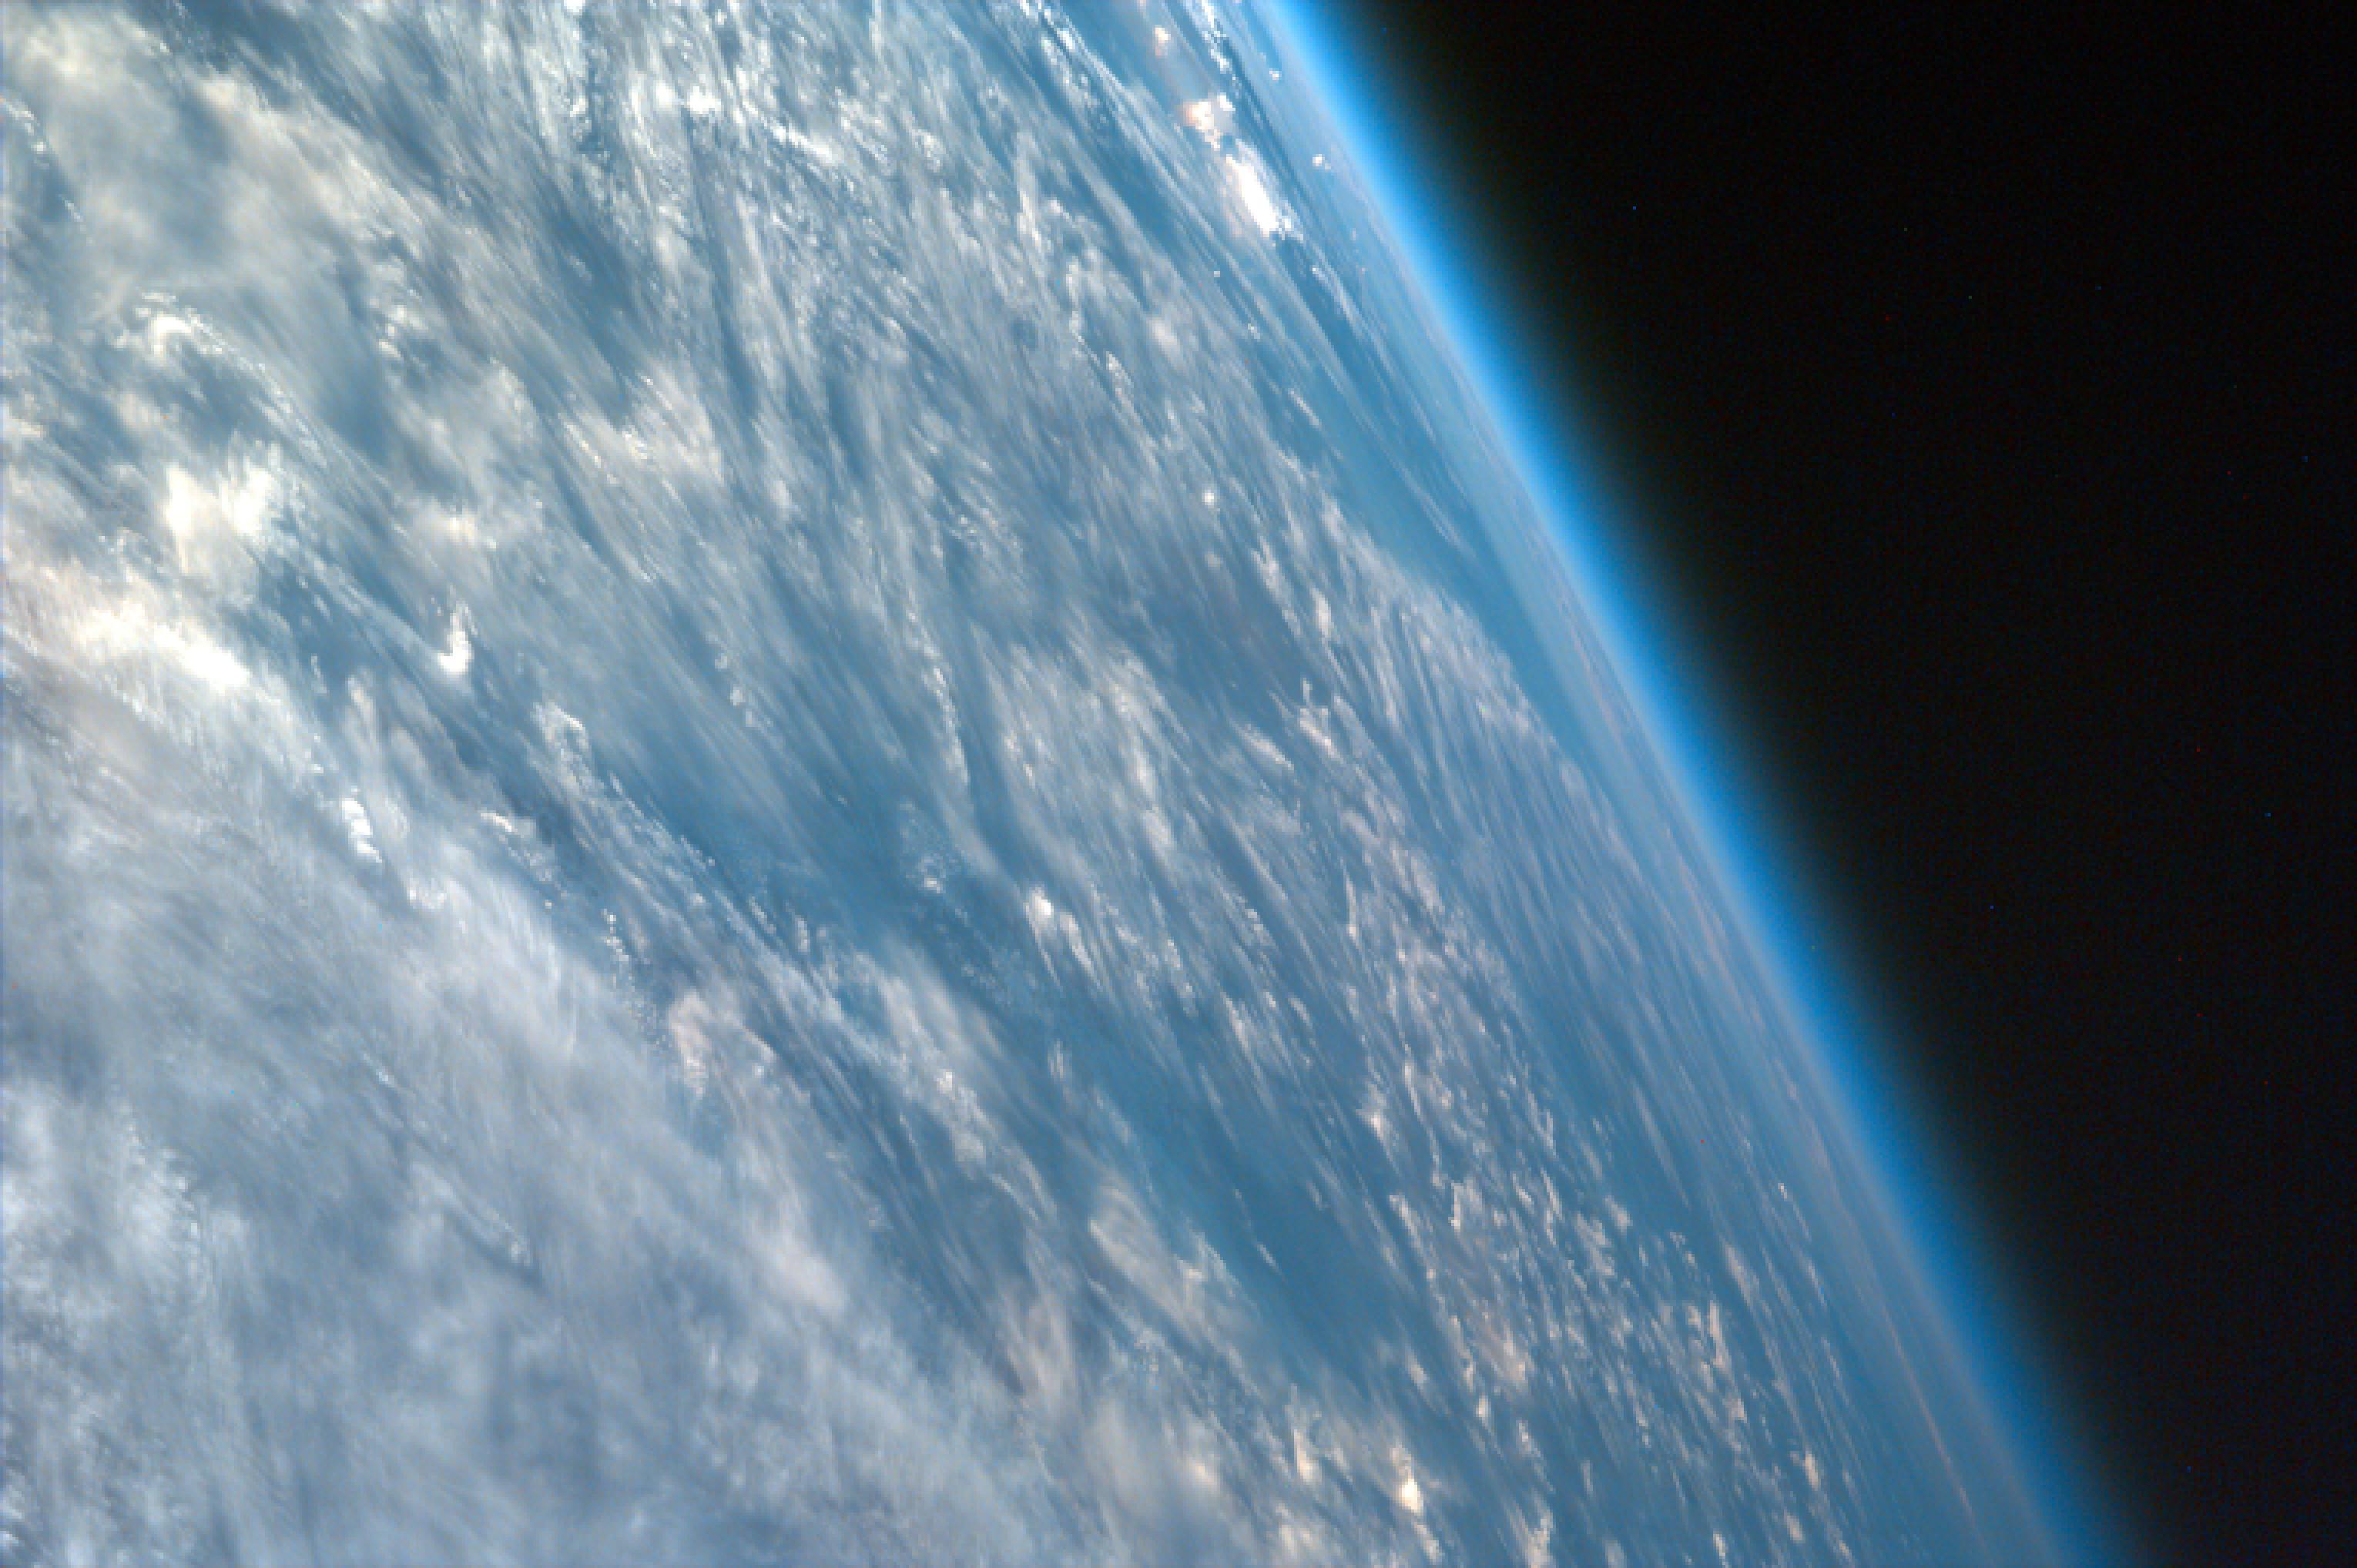 This highly oblique image shot over northwestern part of the African continent captures the curvature of the Earth and shows its atmosphere.